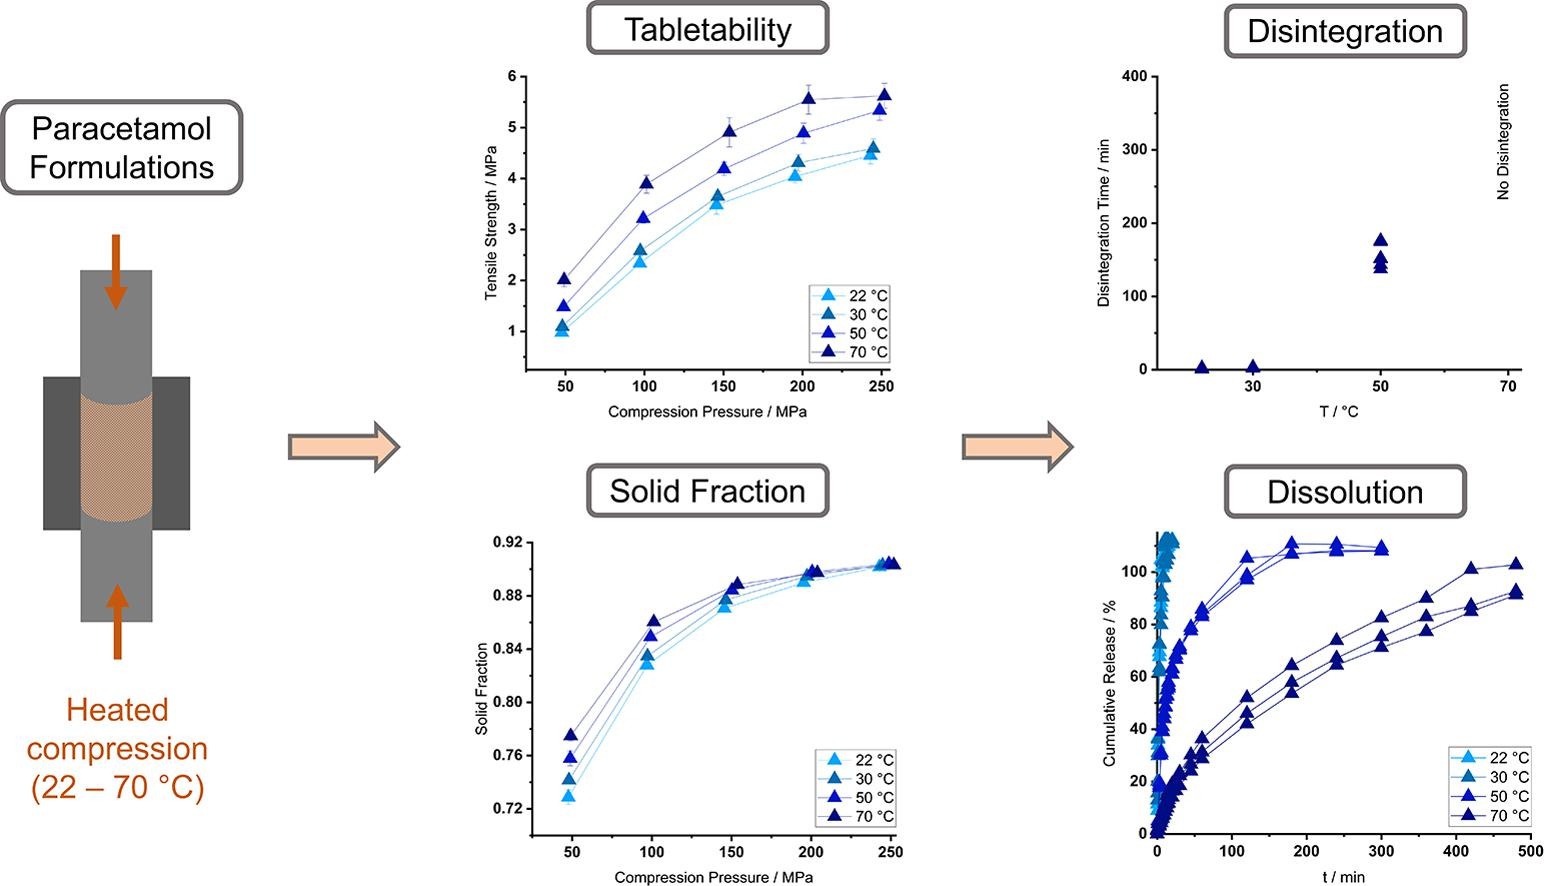 Effect of tableting temperature on tablet properties and dissolution behavior of heat sensitive formulations